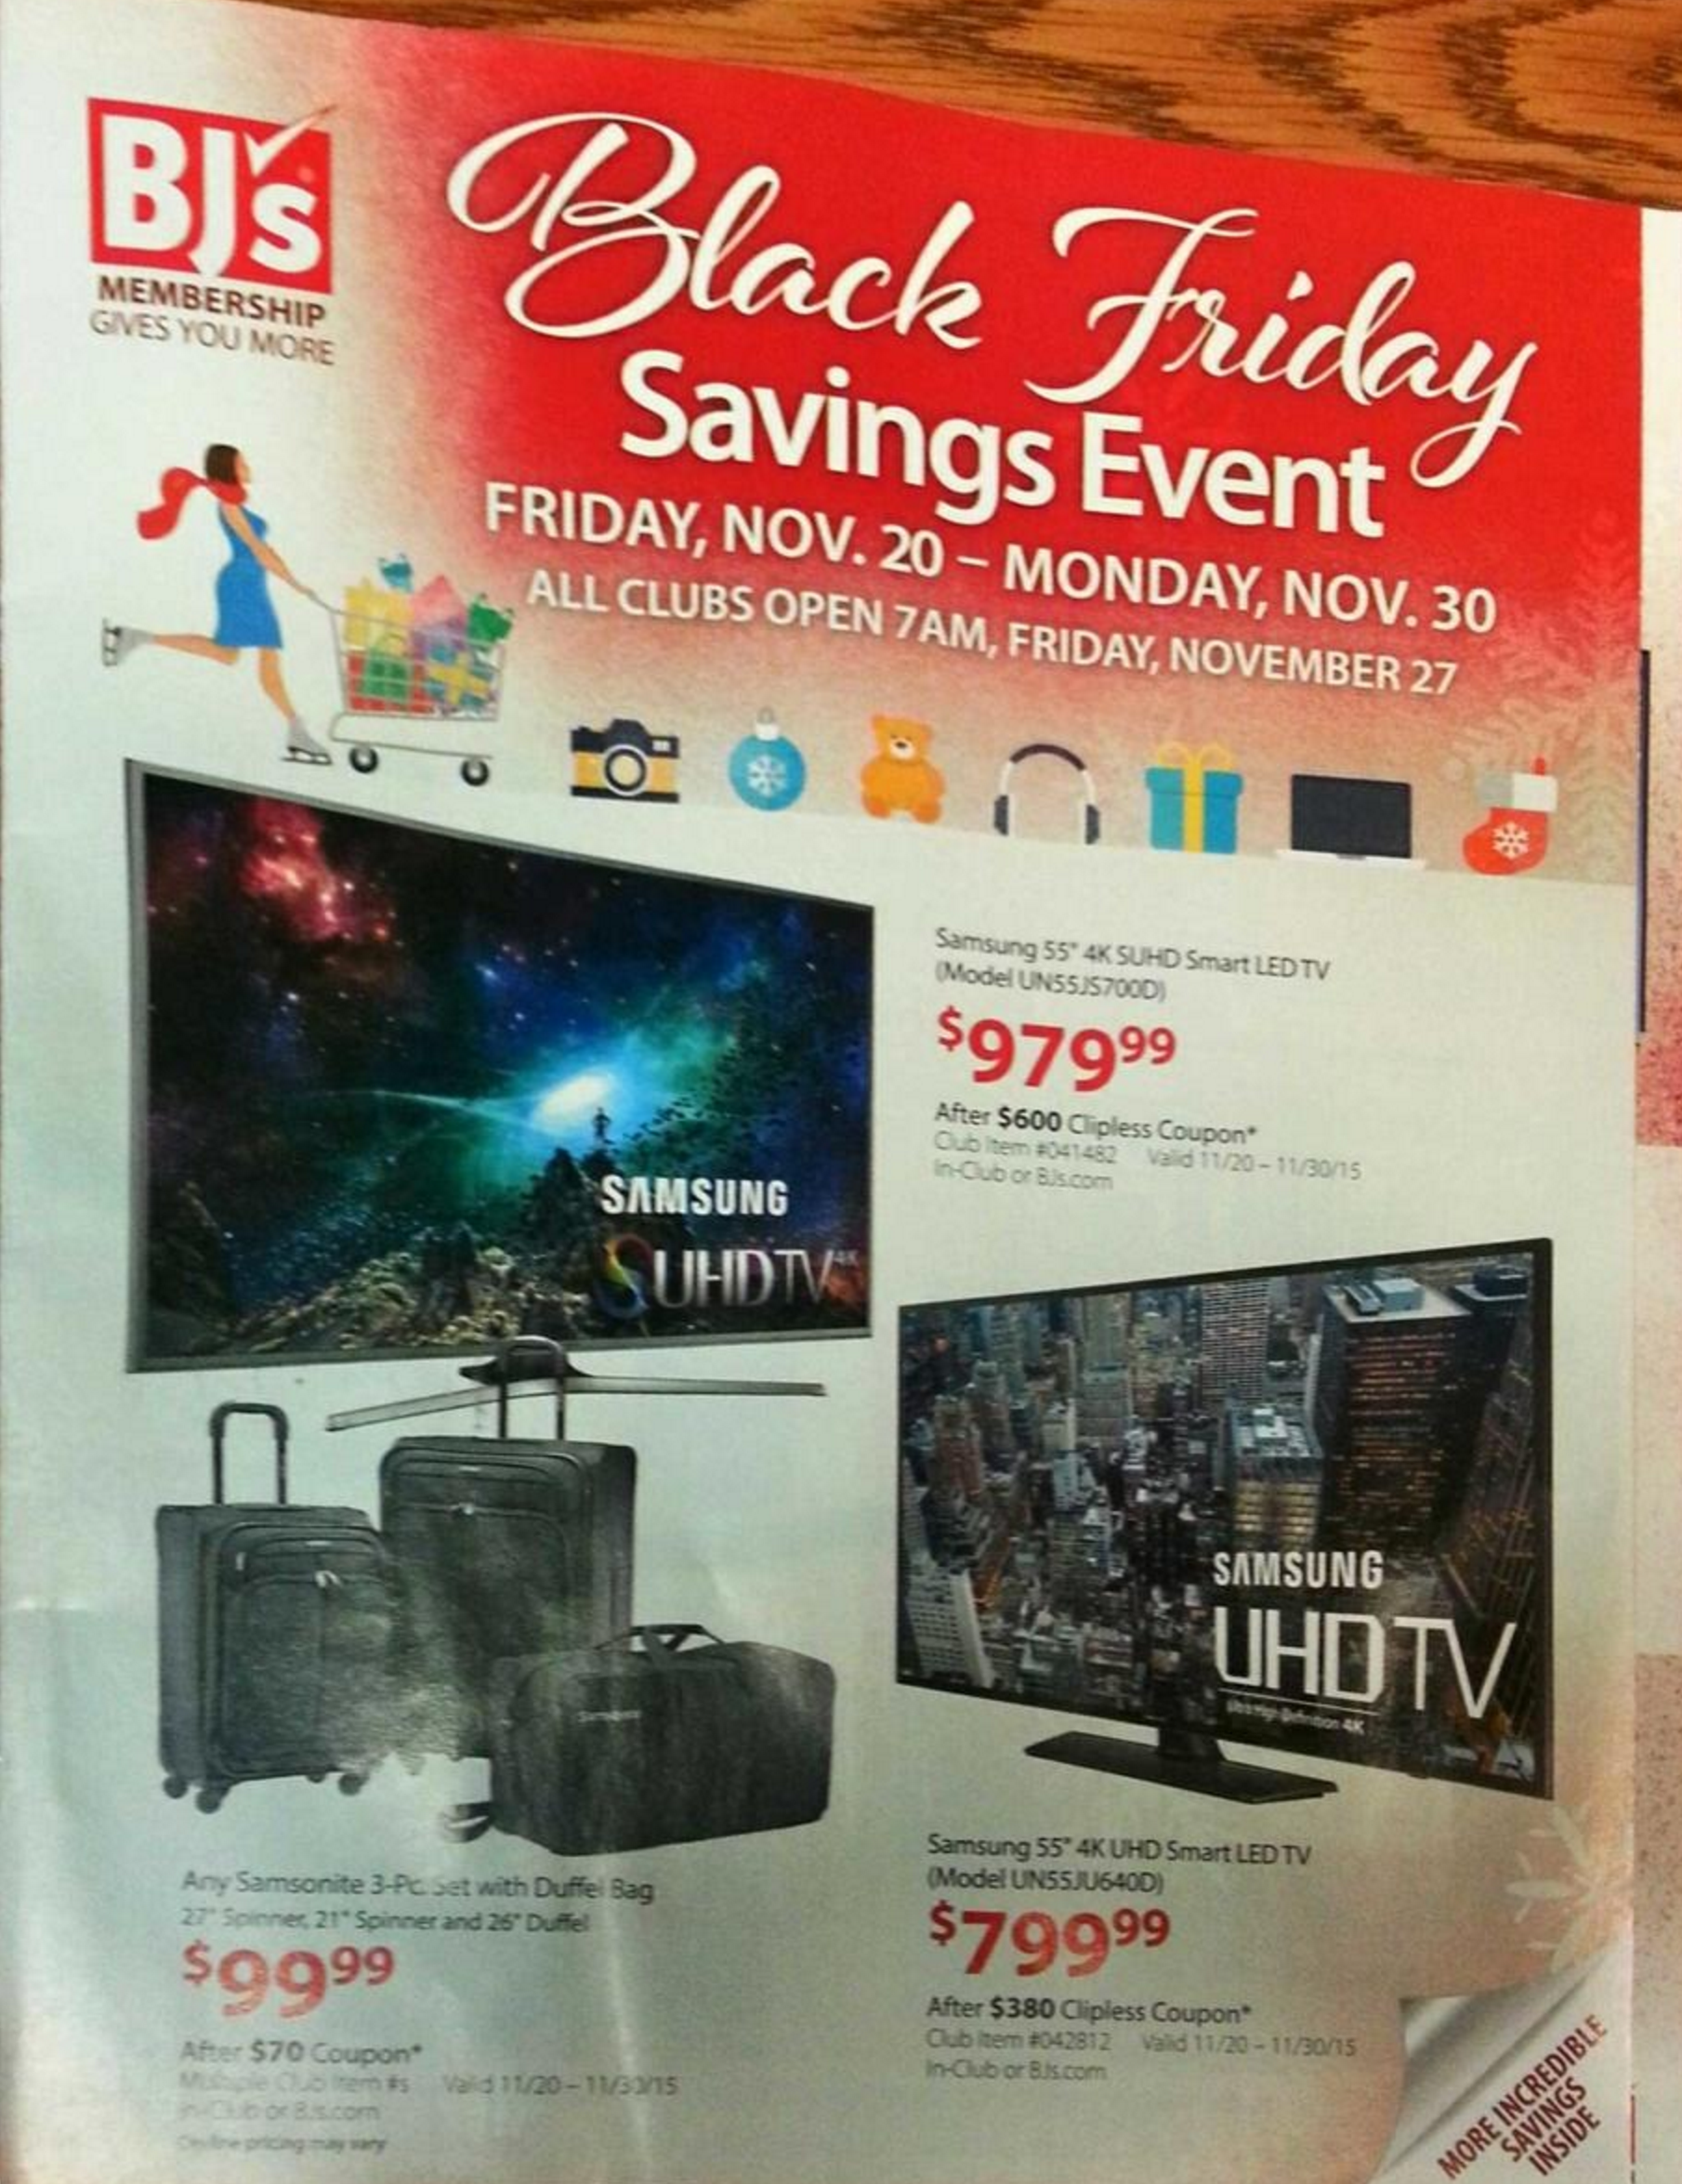 BJ's Warehouse Black Friday ad hits with Samsung 4K UHDTV deals